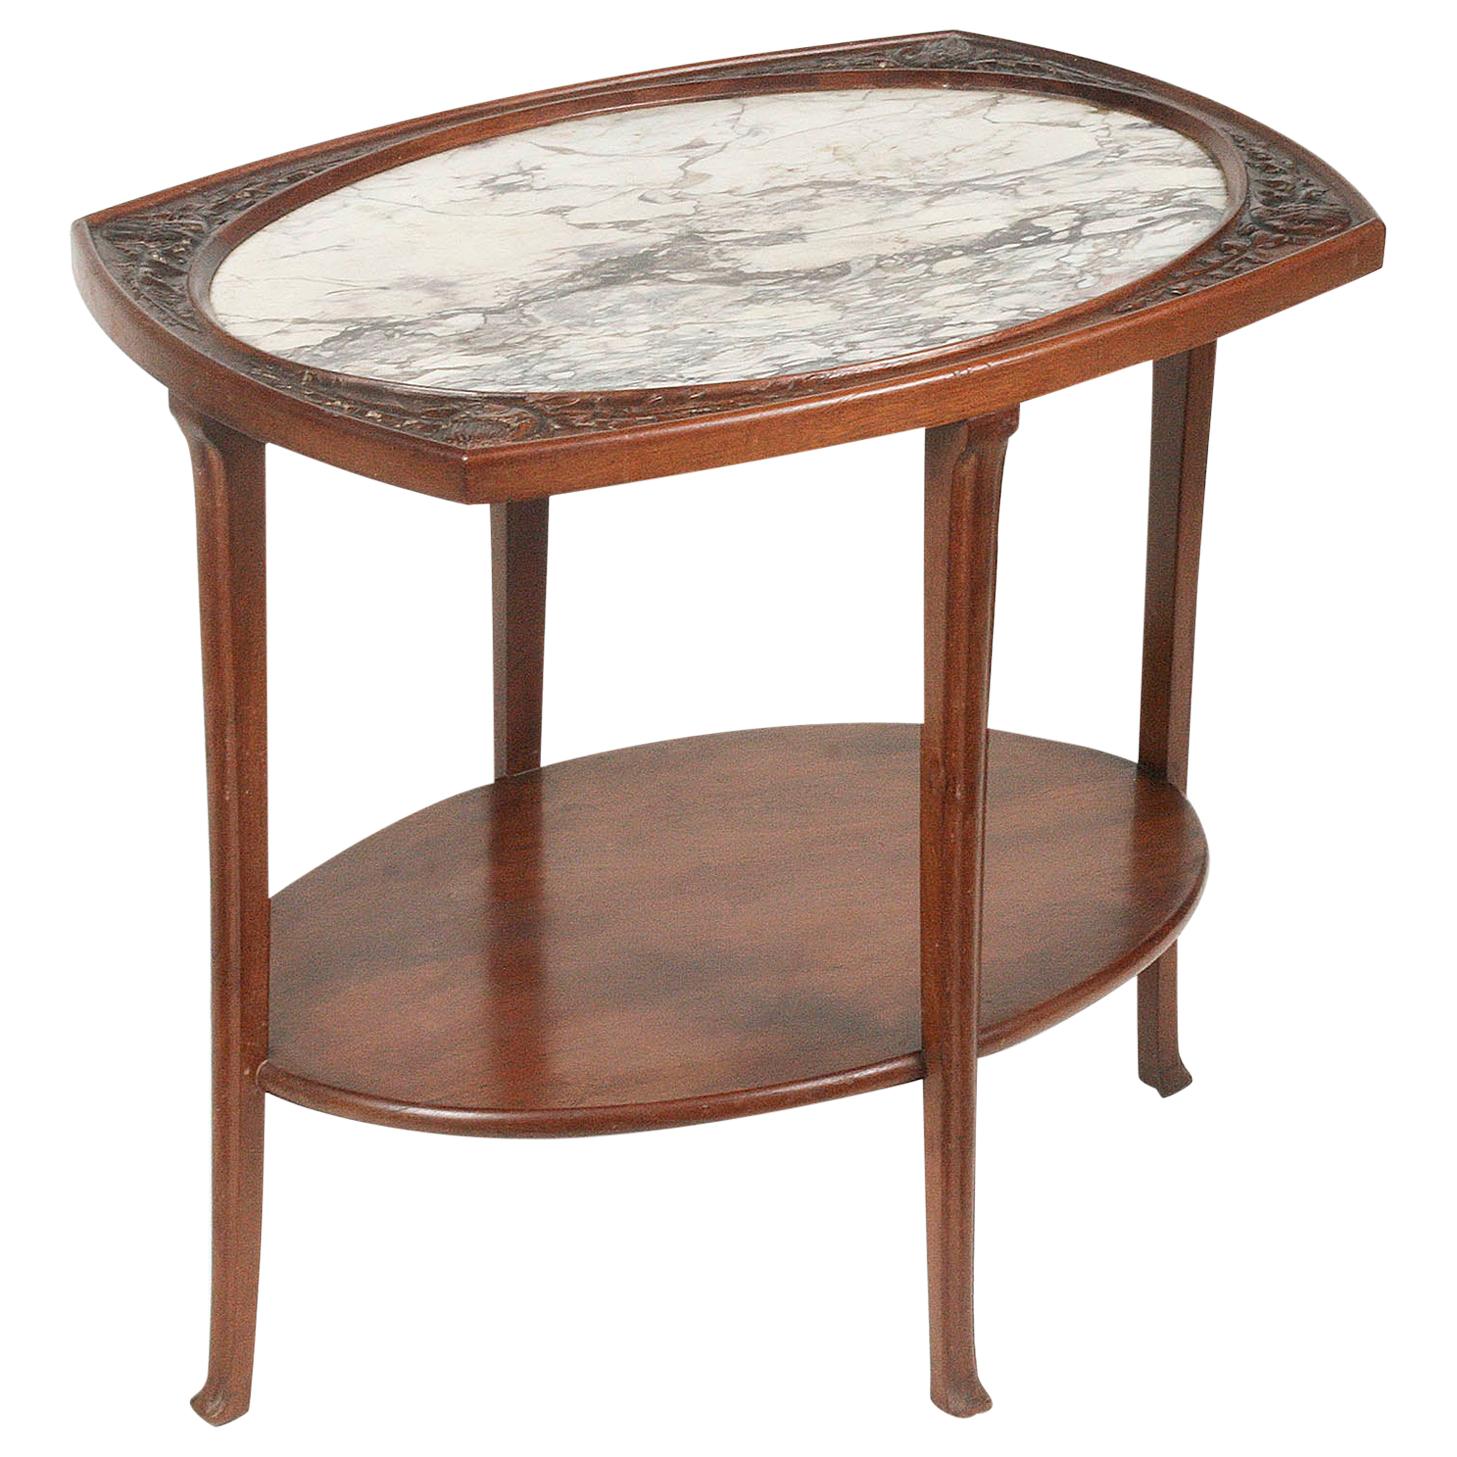 French Mahogany Side Table Art Nouveau with Brescia Violet Marble Top